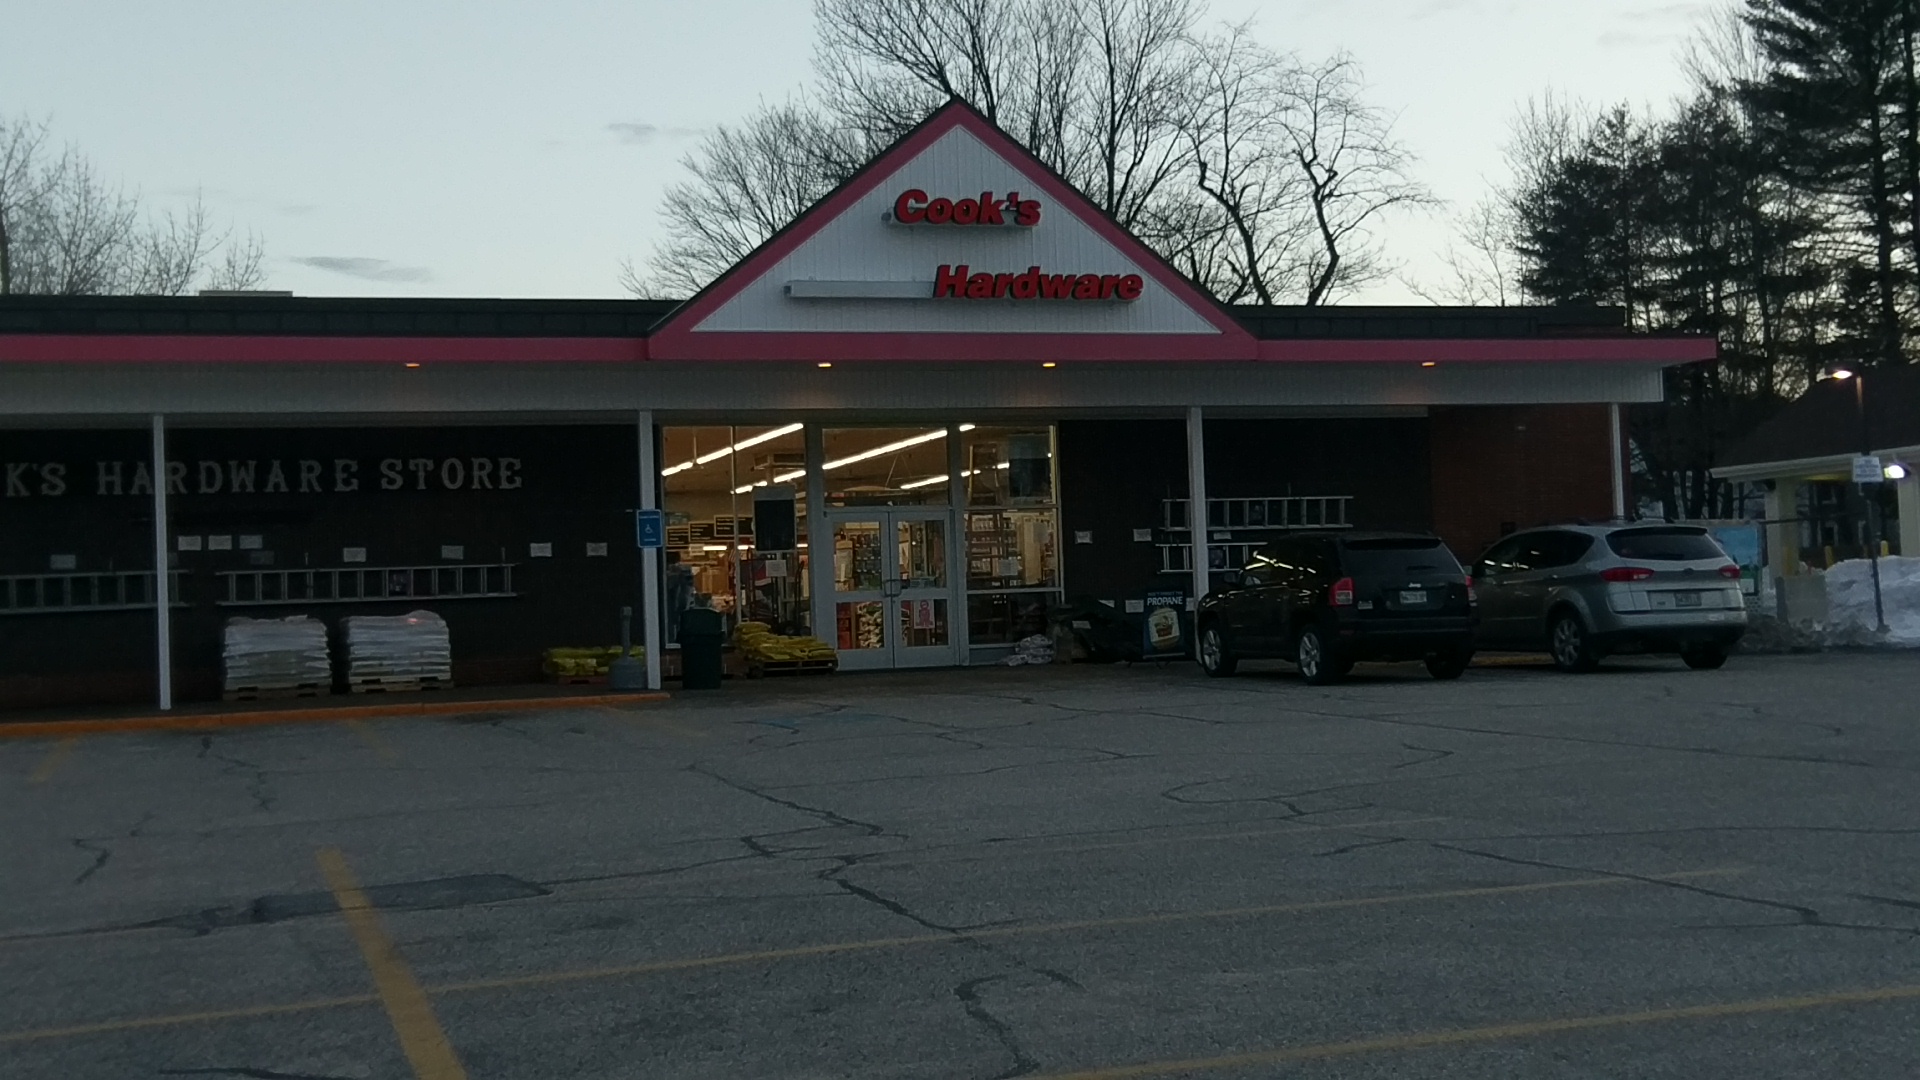 Cook's Hardware